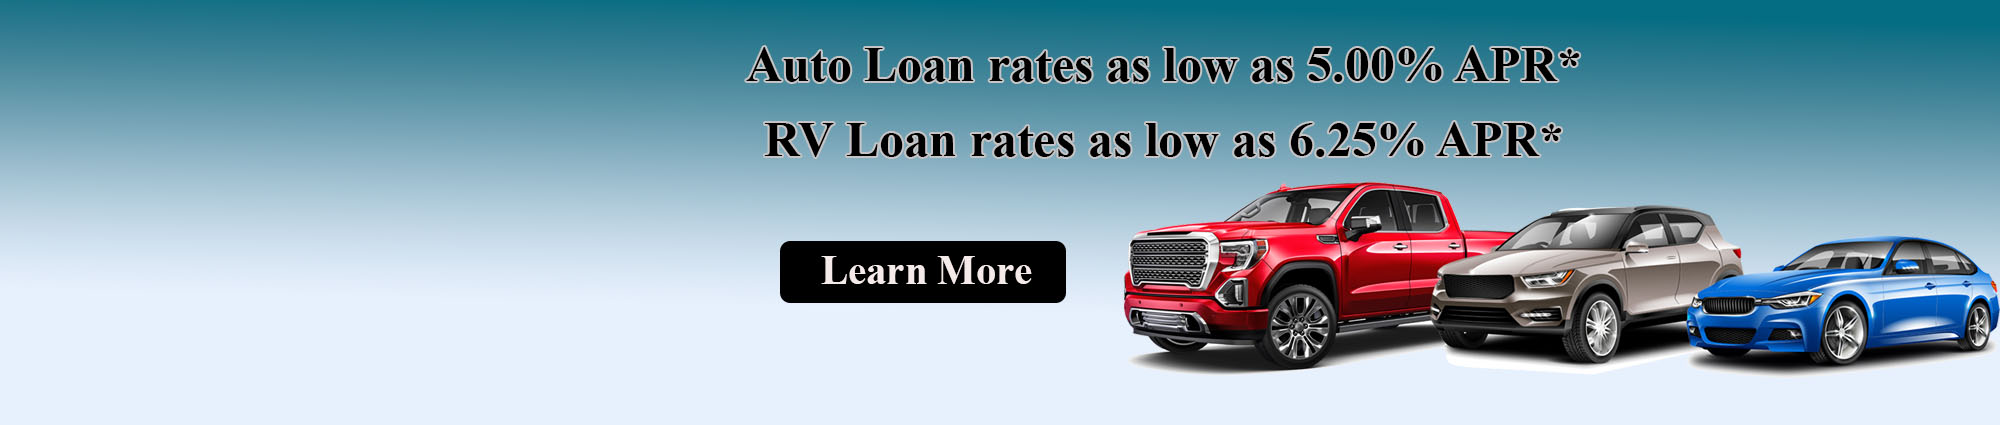 Auto Loan rates as low as five percent annual percentage rate. RV Loan rates as low as six point two five percent annual percentage rate. Click to learn more.